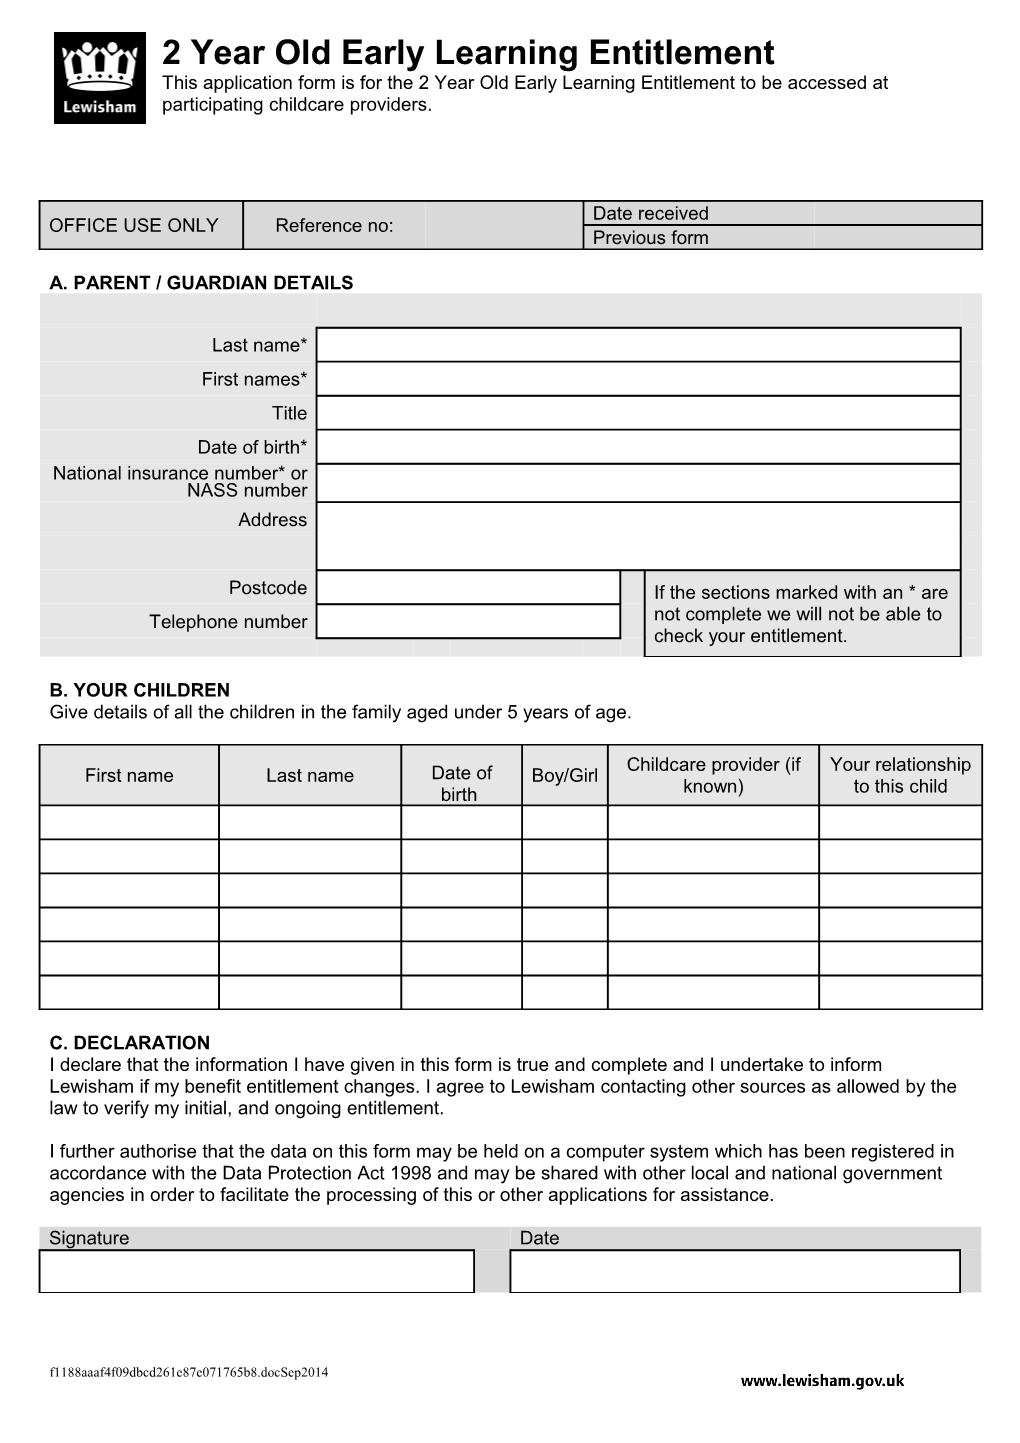 2 Year Old Early Learning Entitlement Form